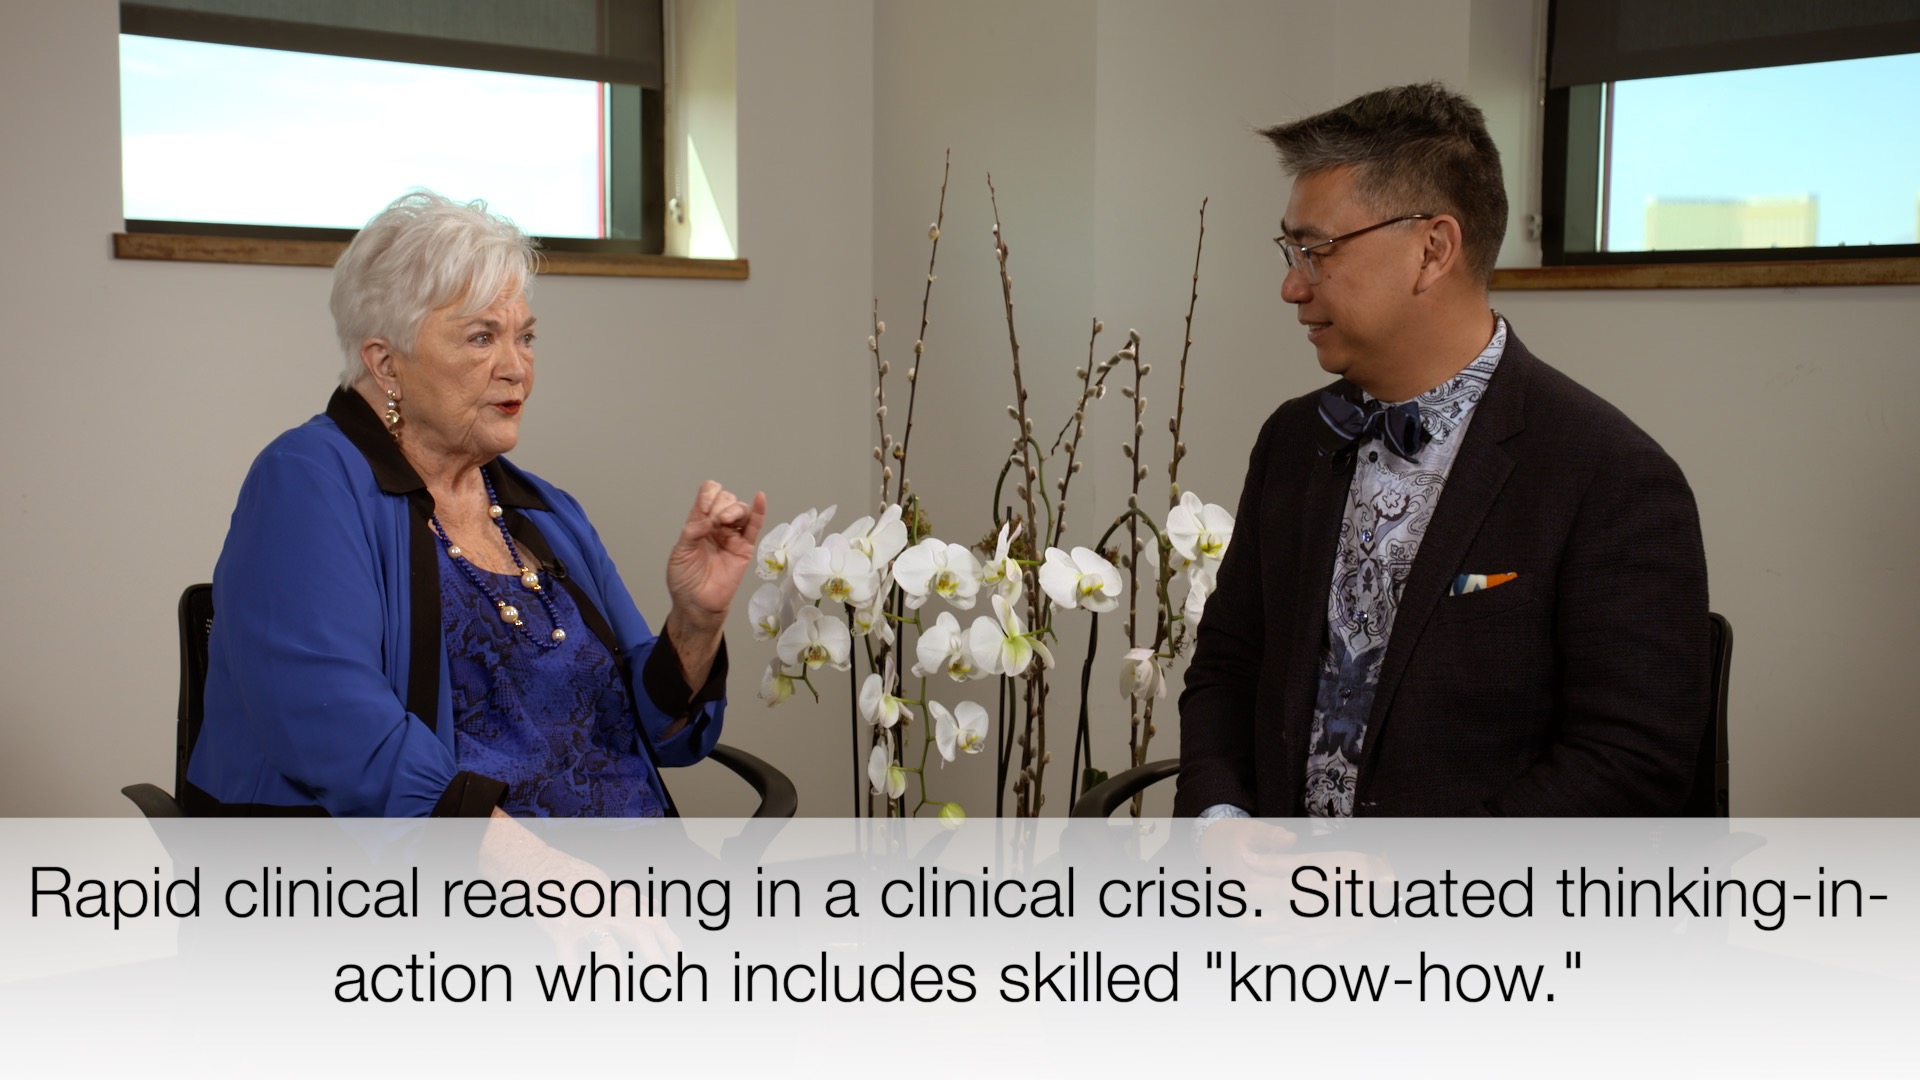 Dr. Benner & Dr. Chan on Rapid clinical reasoning in a clinical crisis